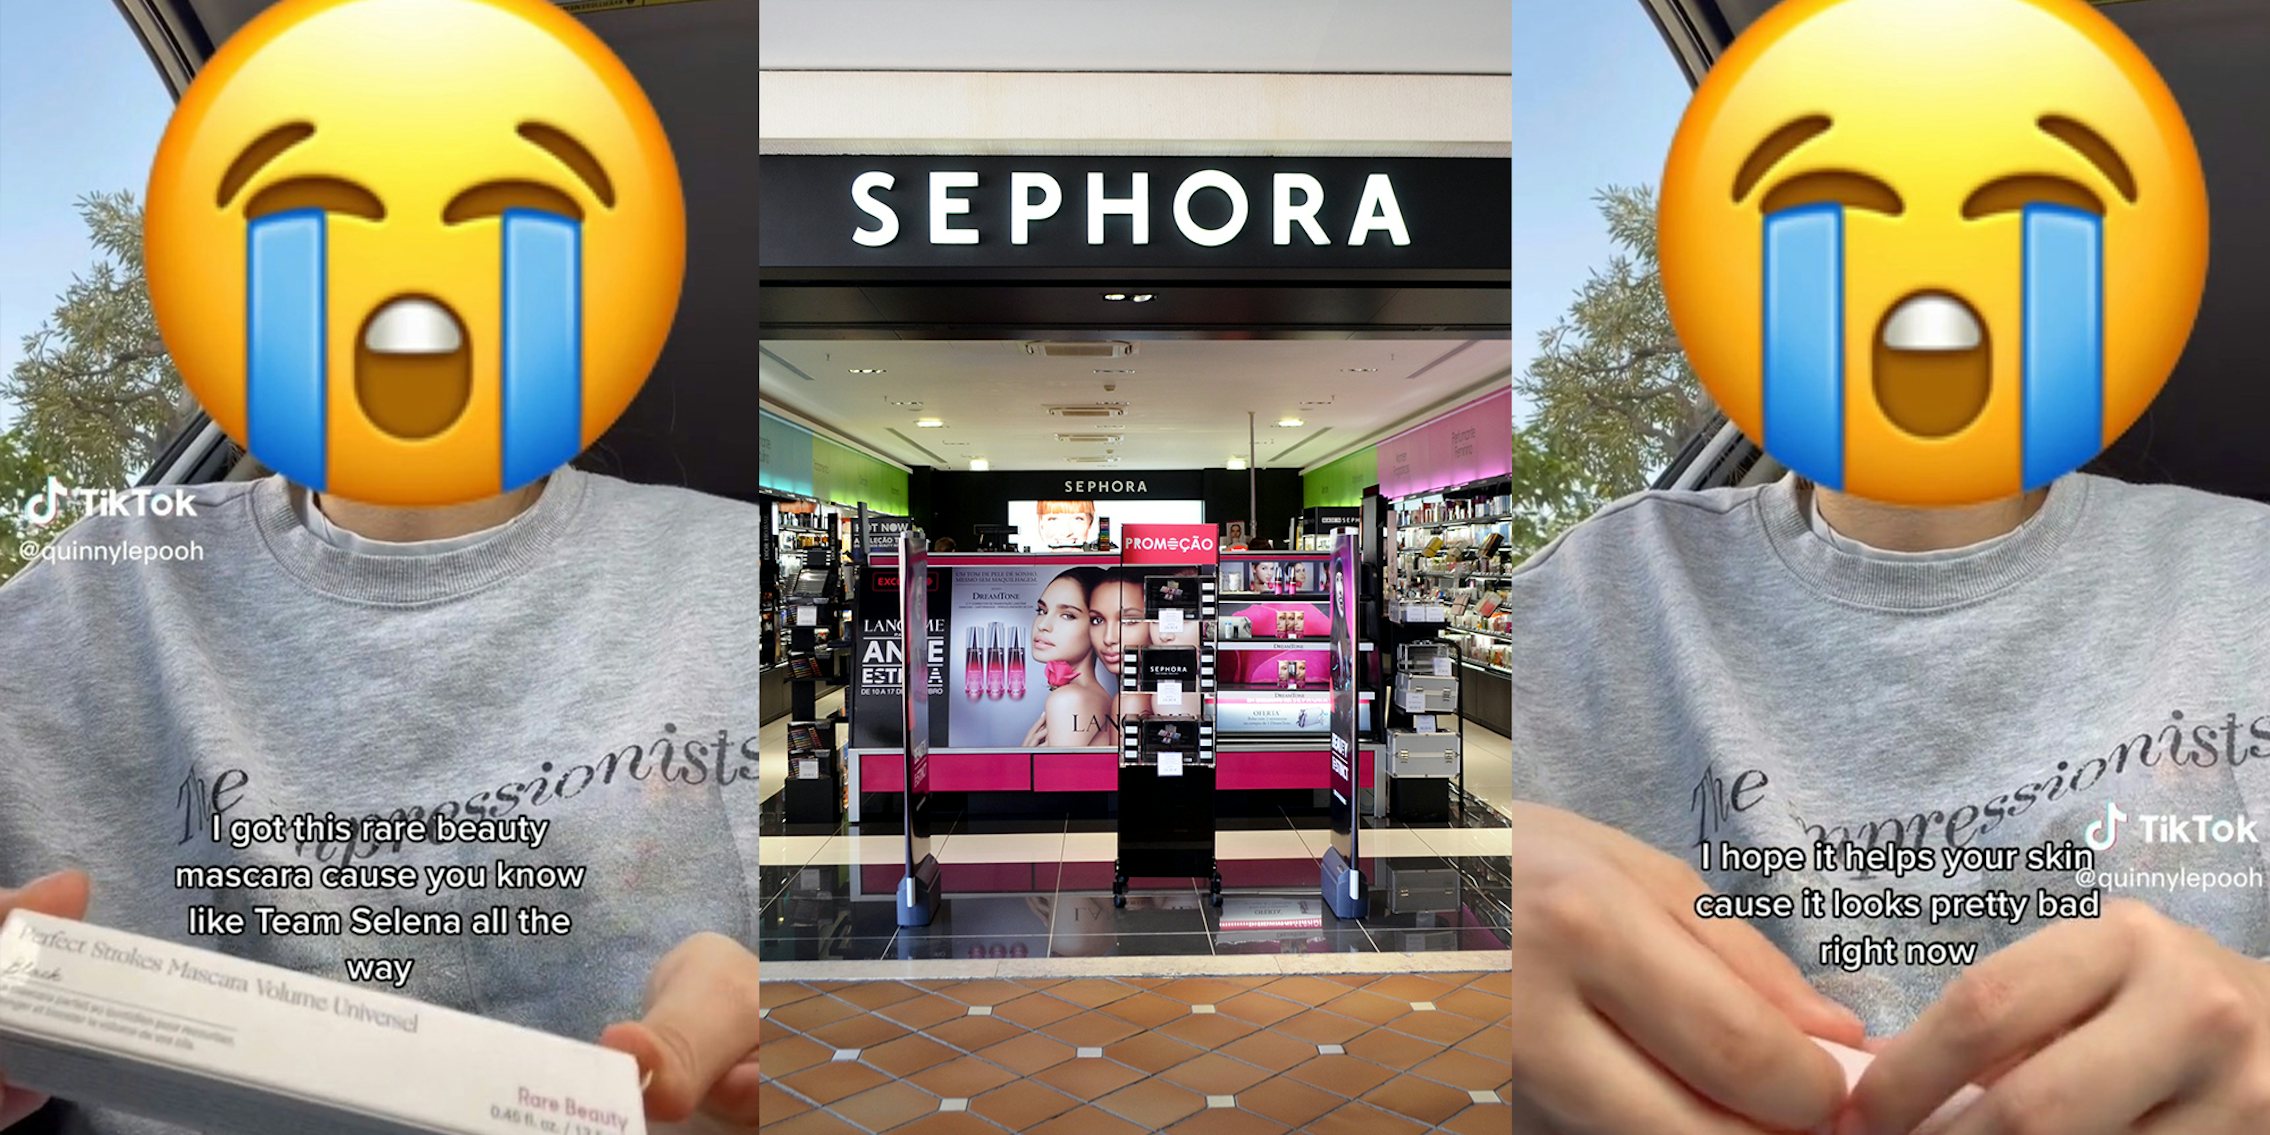 Customer says Sephora employee made her cry while she was checking her out